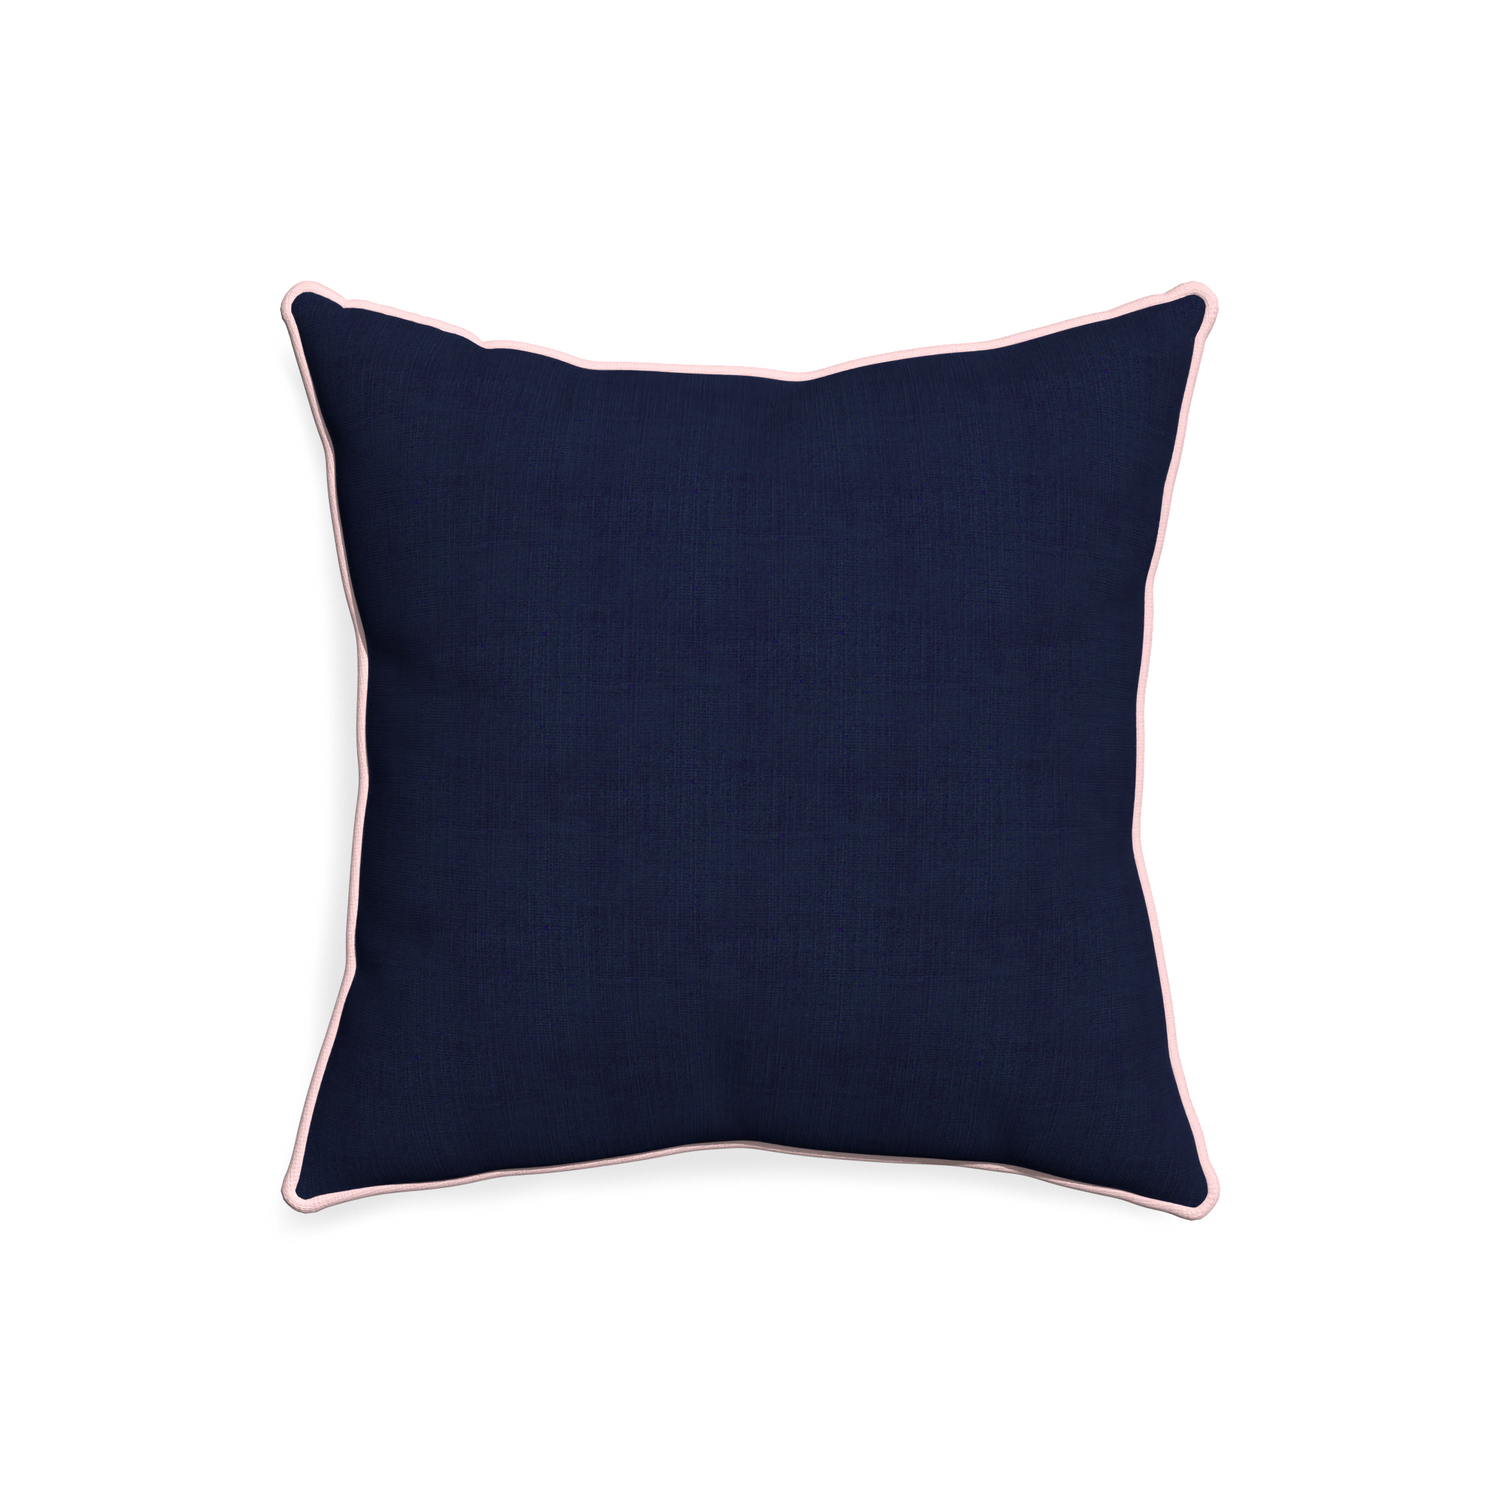 20-square midnight custom navy bluepillow with petal piping on white background